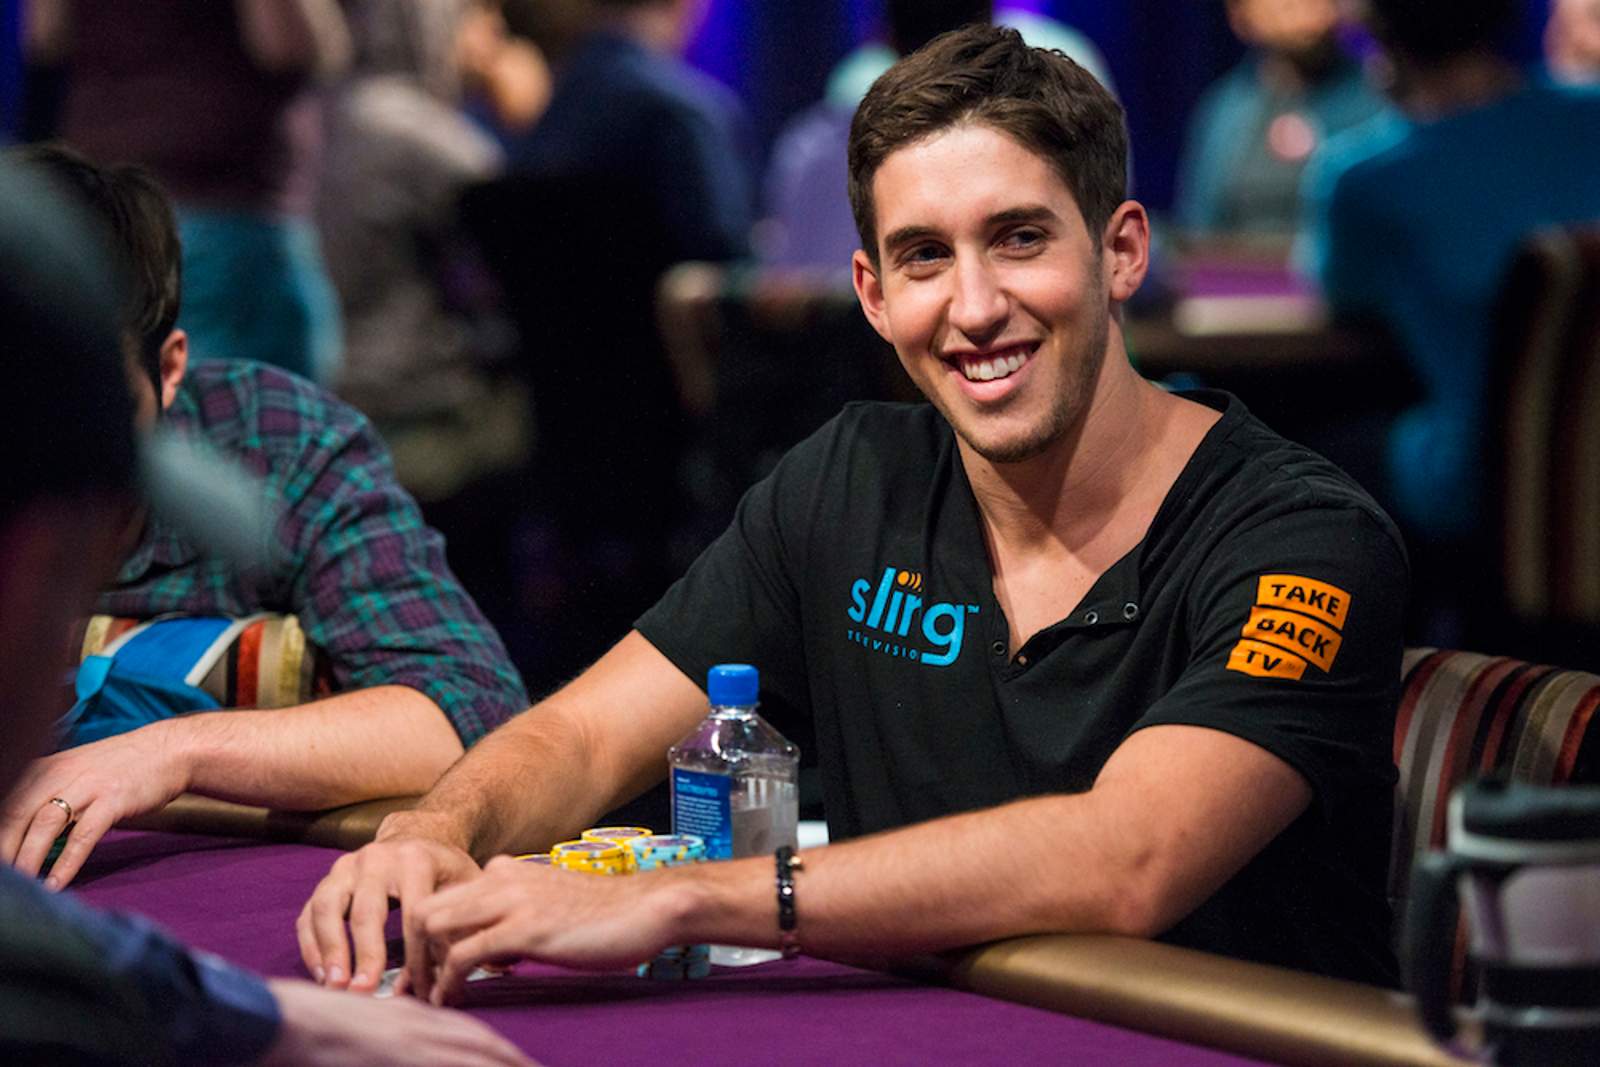 Poker Central Podcast Episode 8 - Colman and Koon Steal The Show